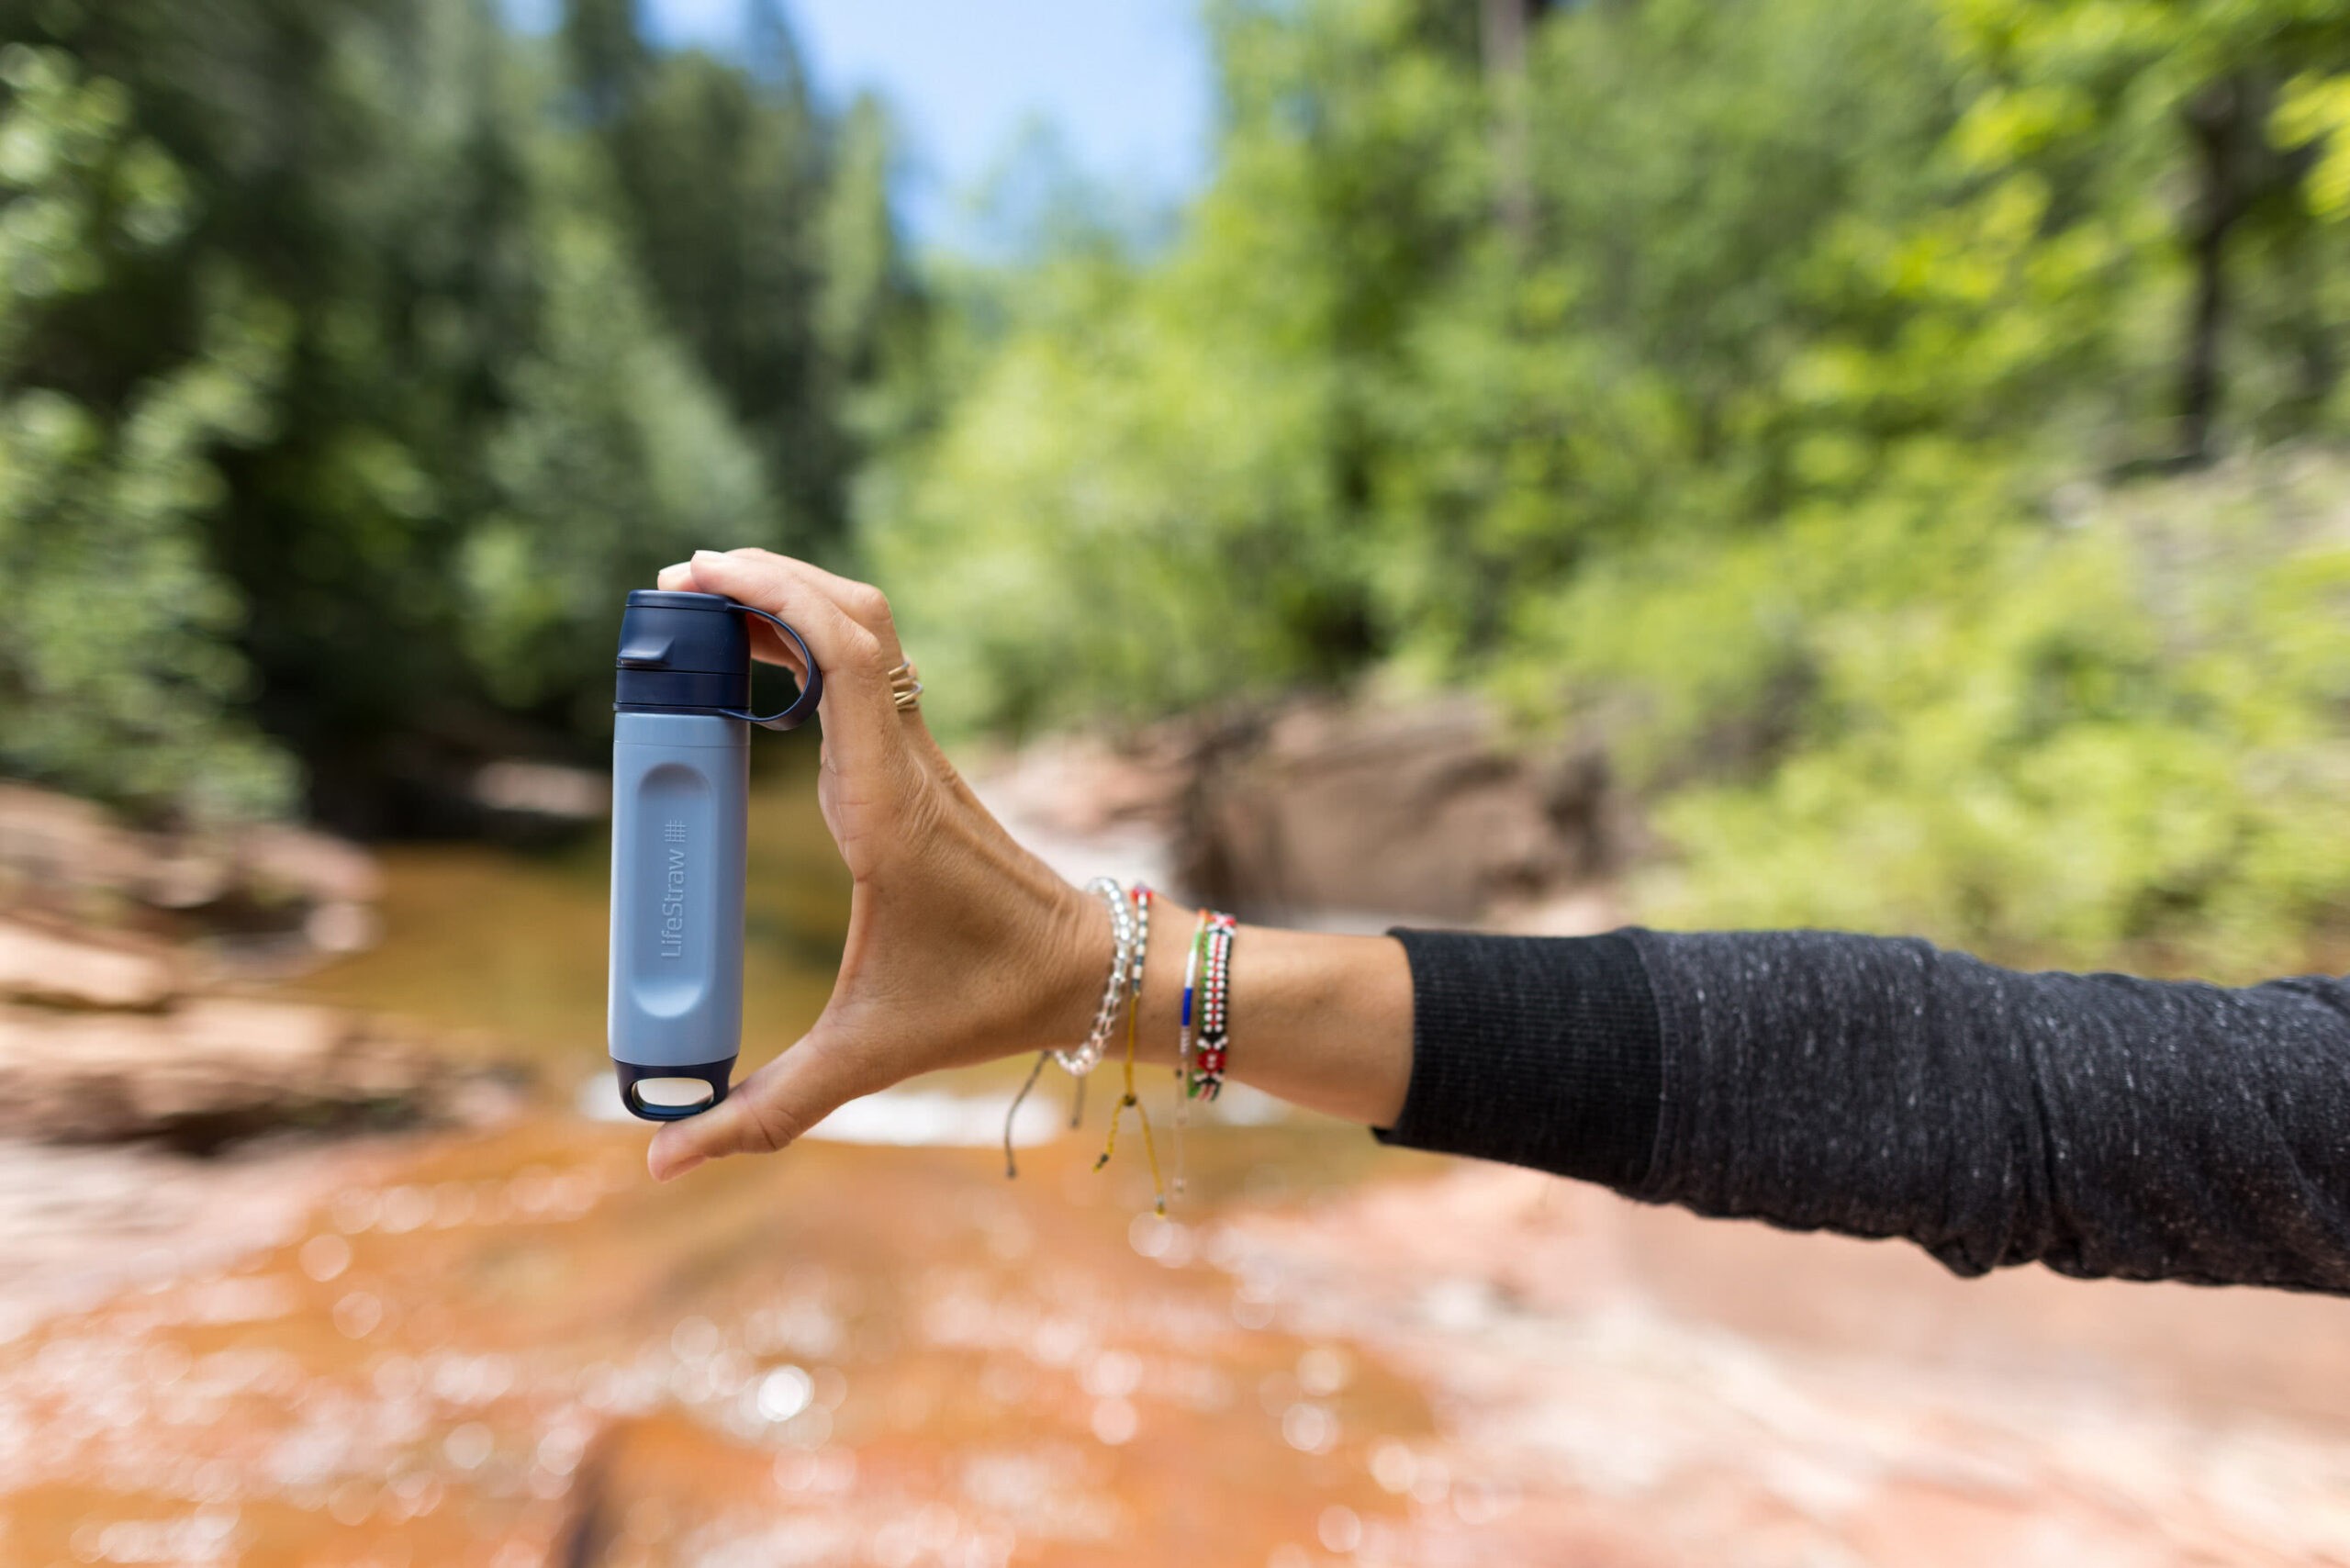 LifeStraw announces the launch of the lightest and most compact water filter in its portfolio - the Peak Series Solo Water Filter.